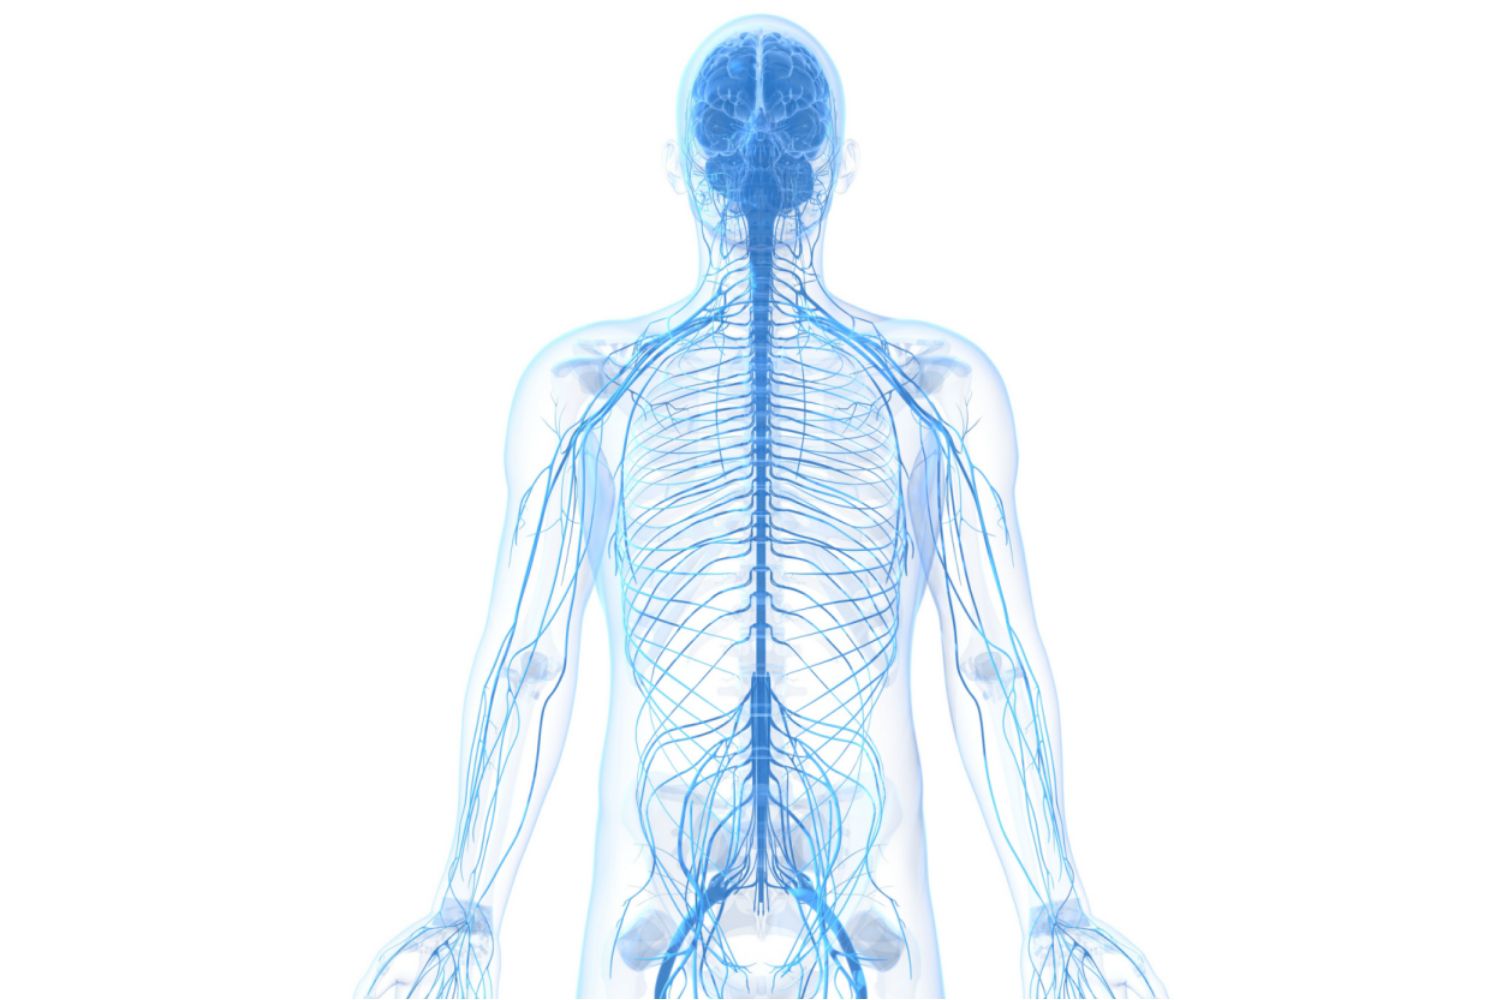 Peripheral Nervous System Pain